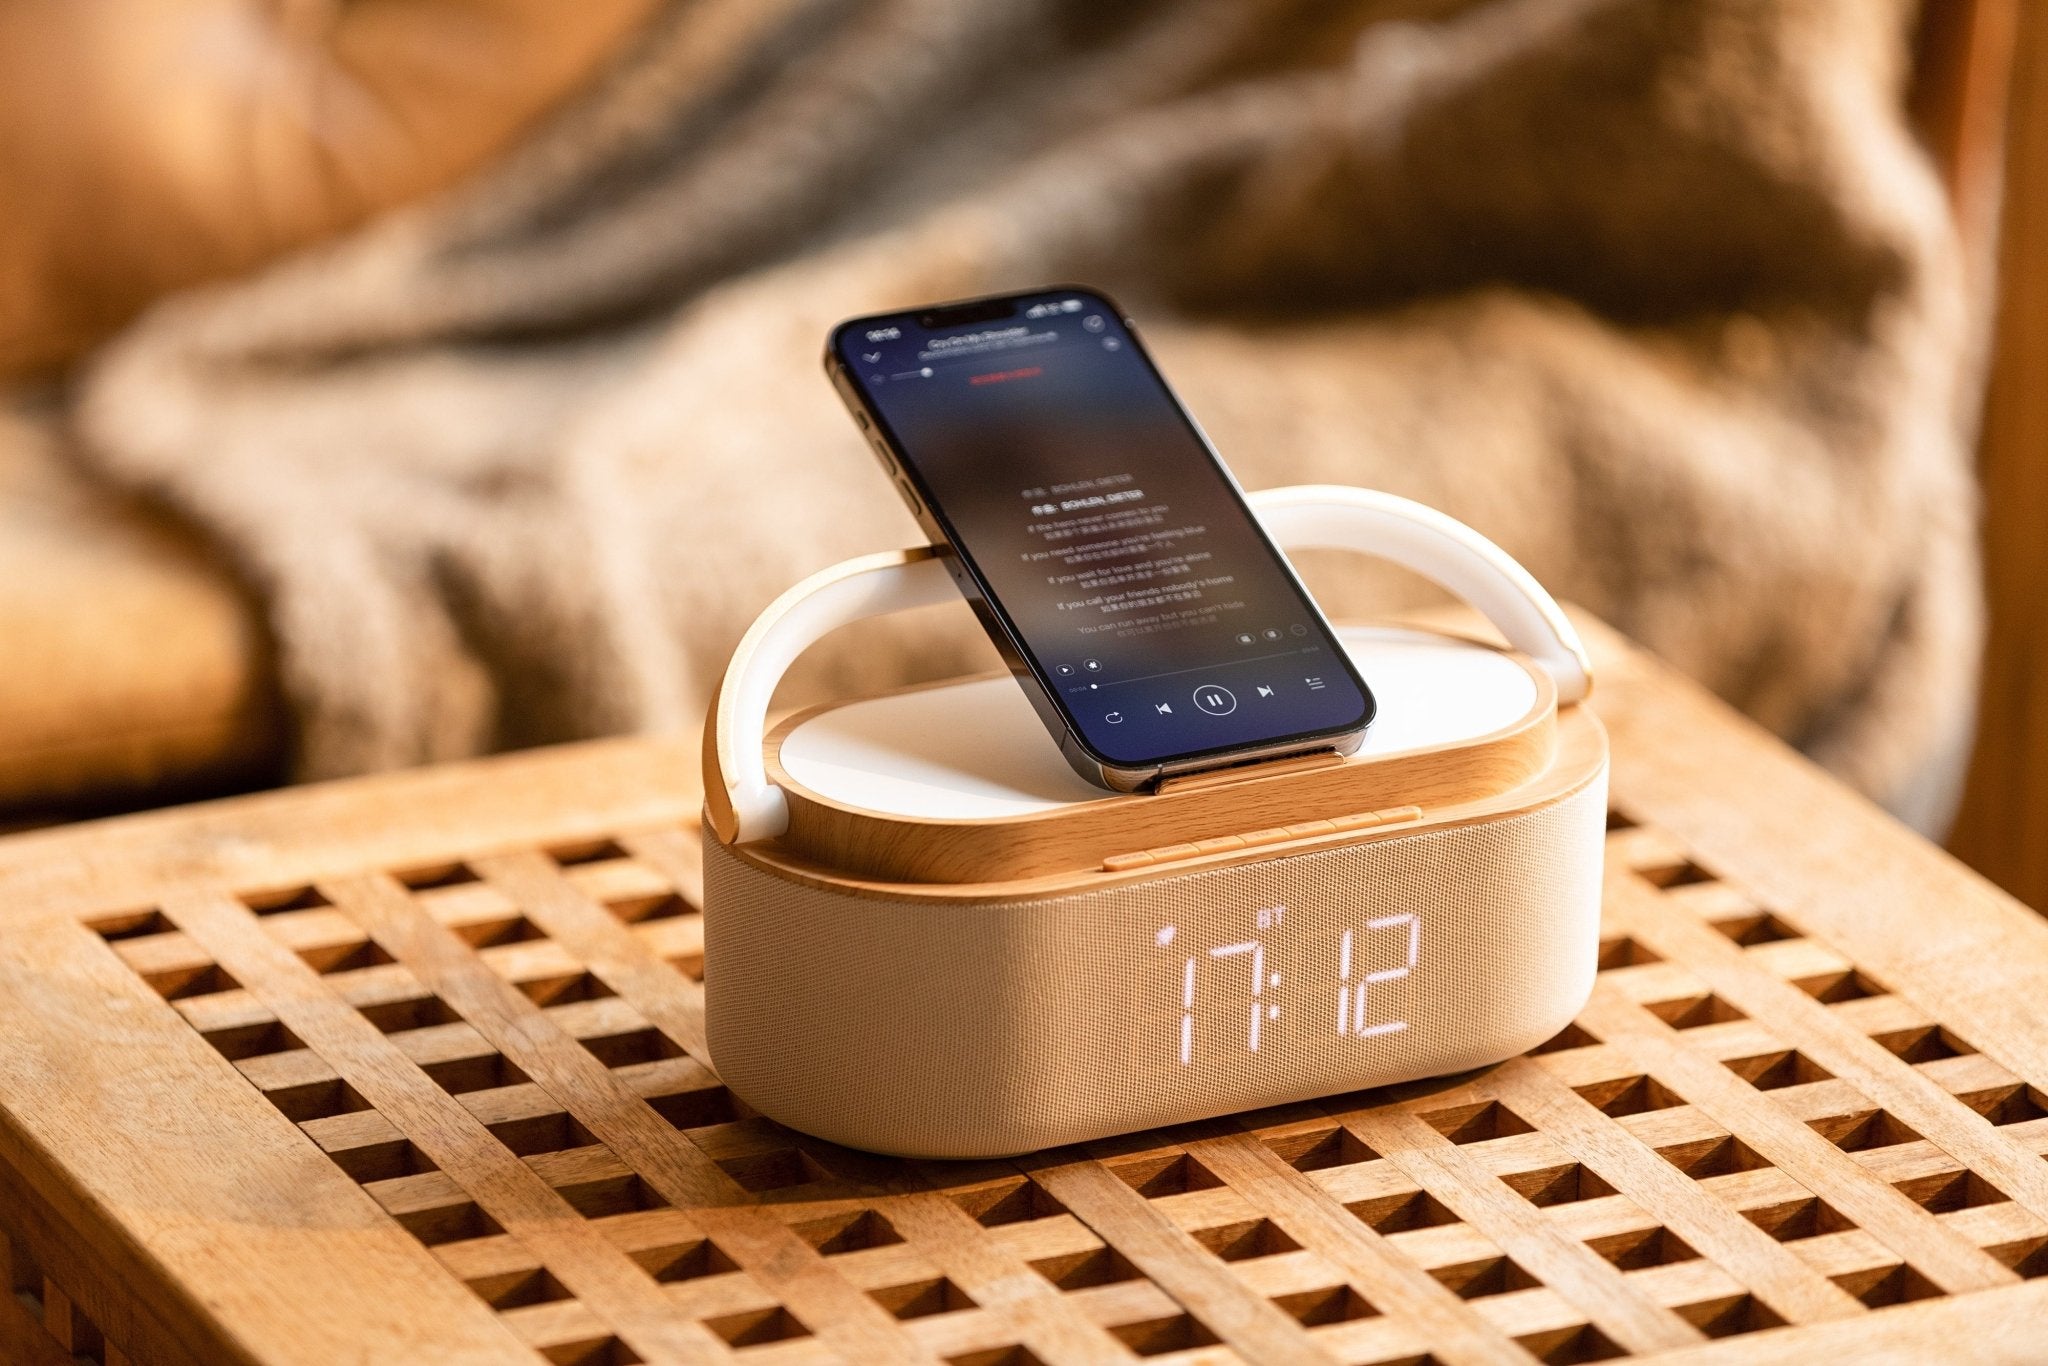 UK Technology Clock Radio Handle Lamp on a table with a phone in the upright position playing music via bluetooth